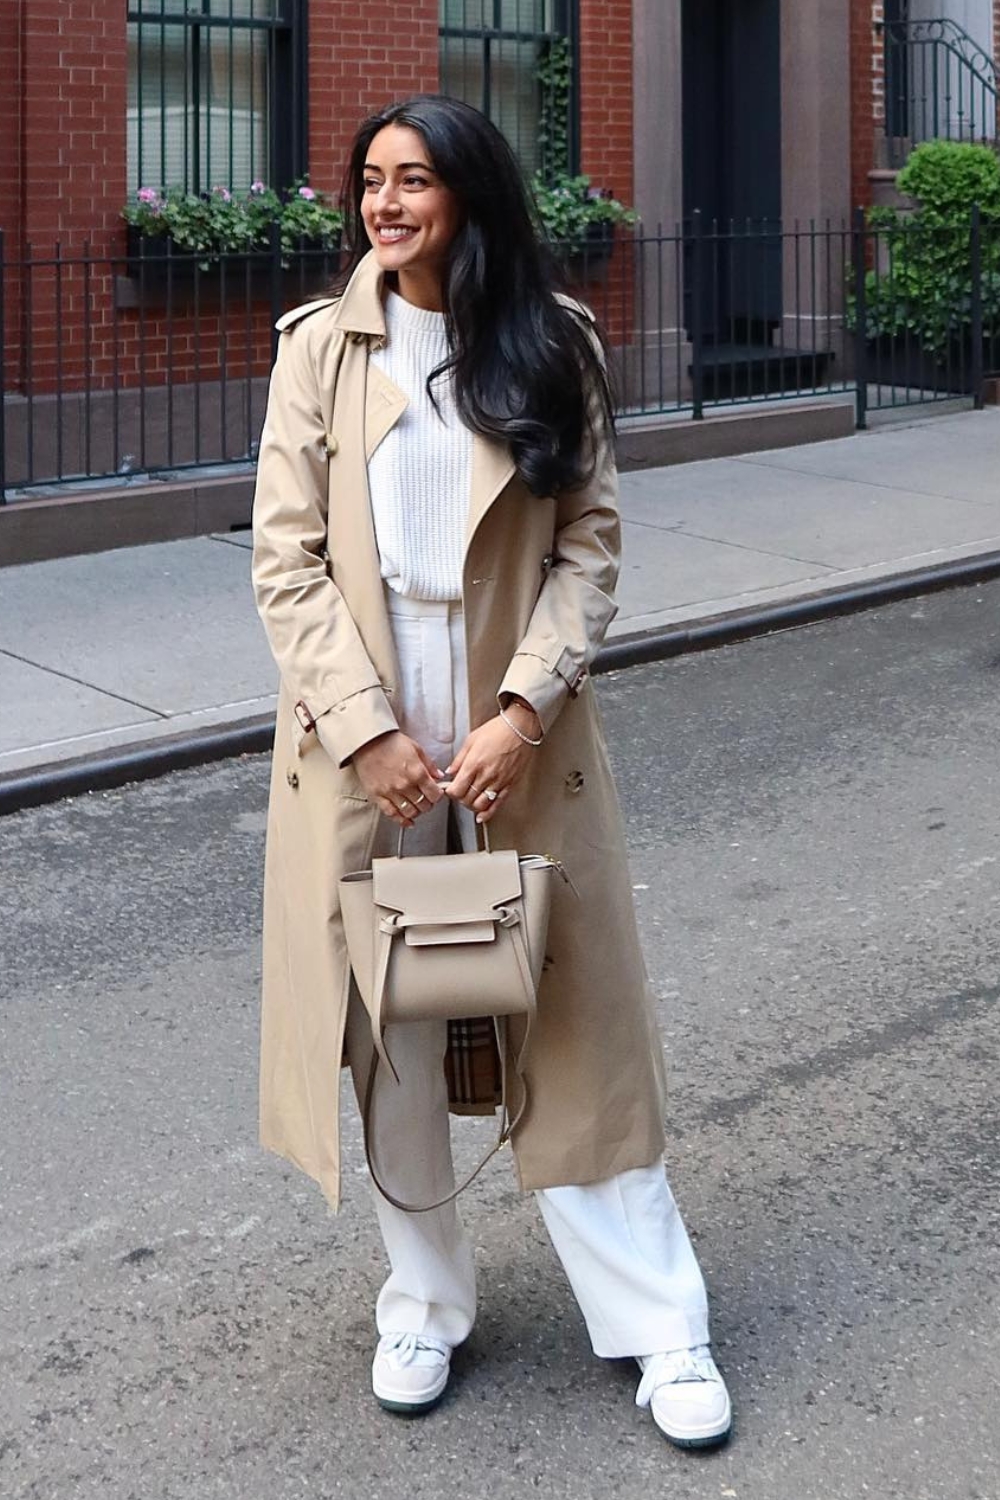 Casual Spring Outfit Ideas - Trench Coat